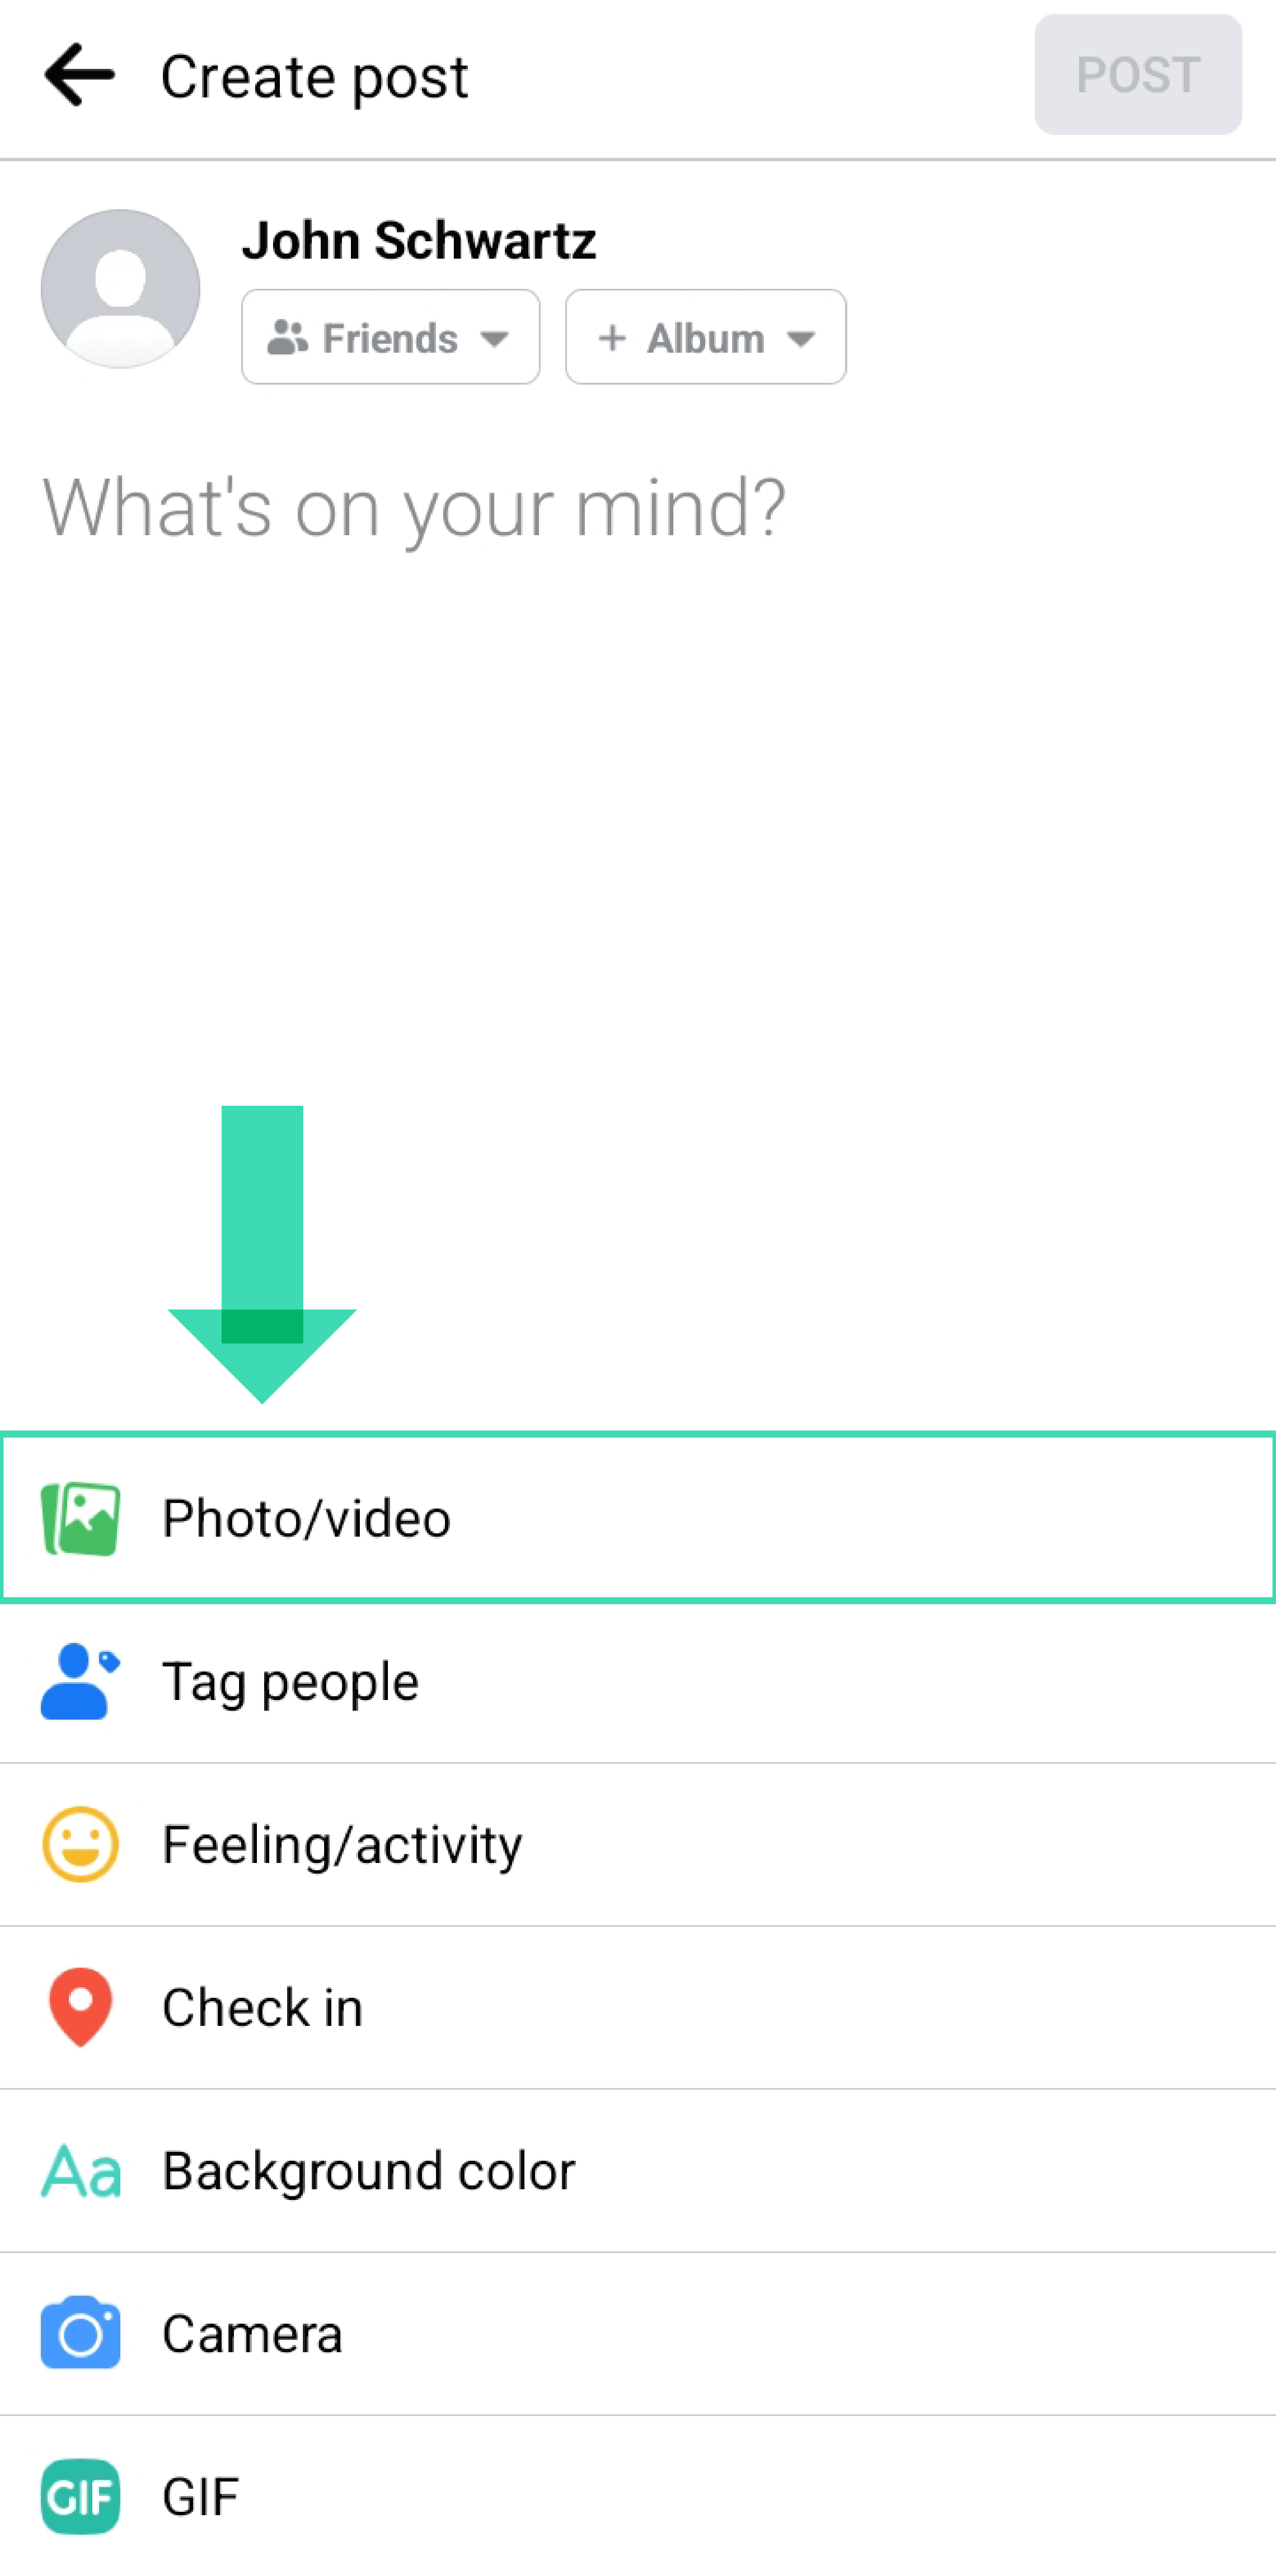 upload photo or video page